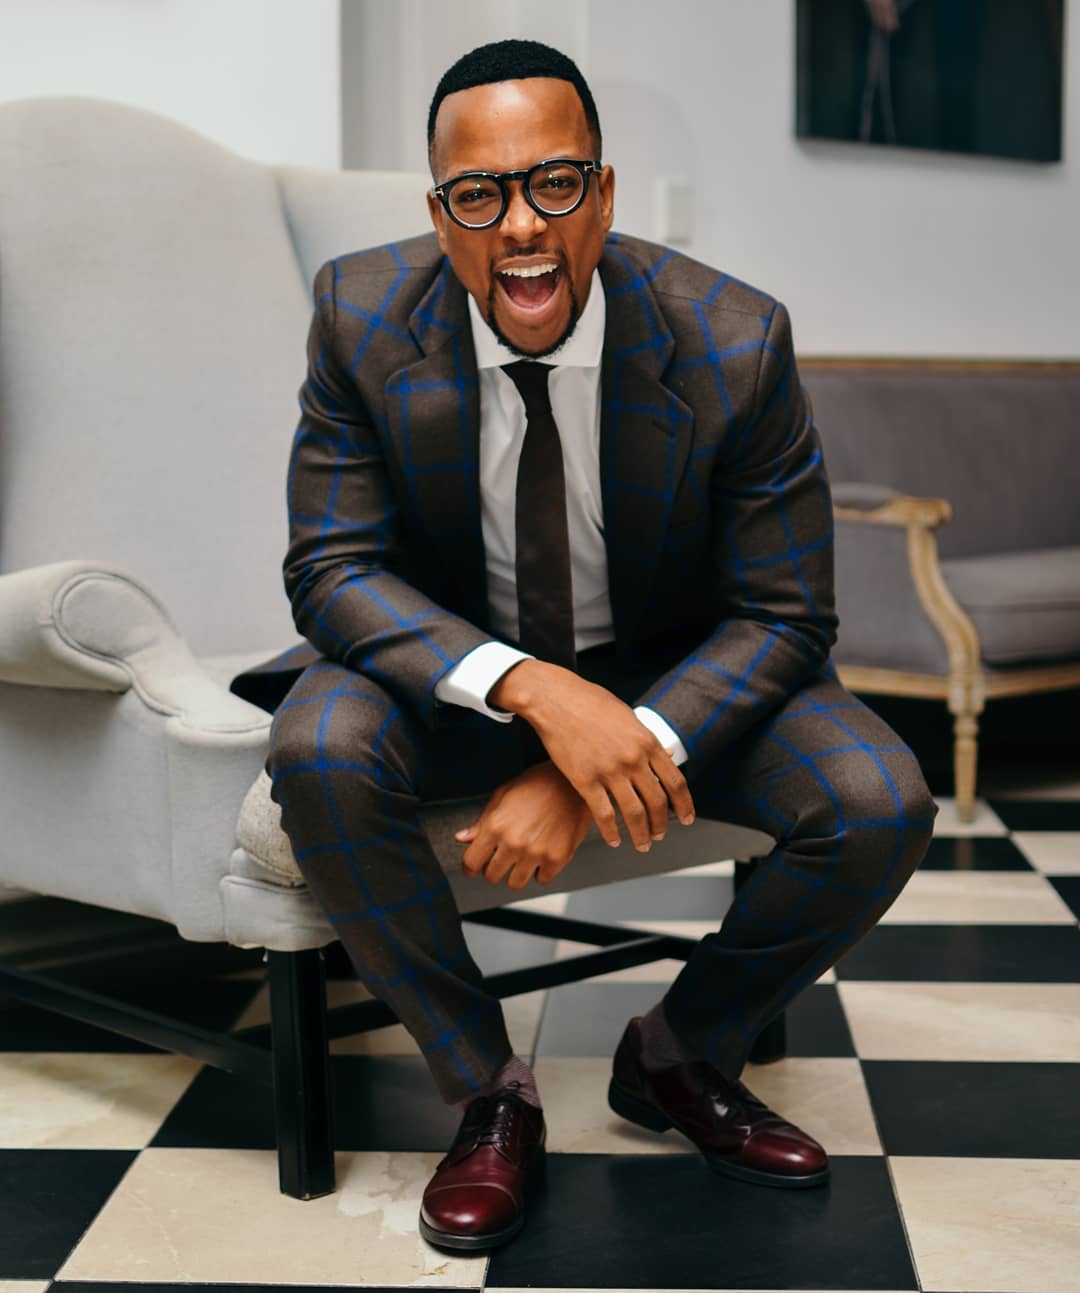 Maps Maponyane gives helping hand in Langrug community